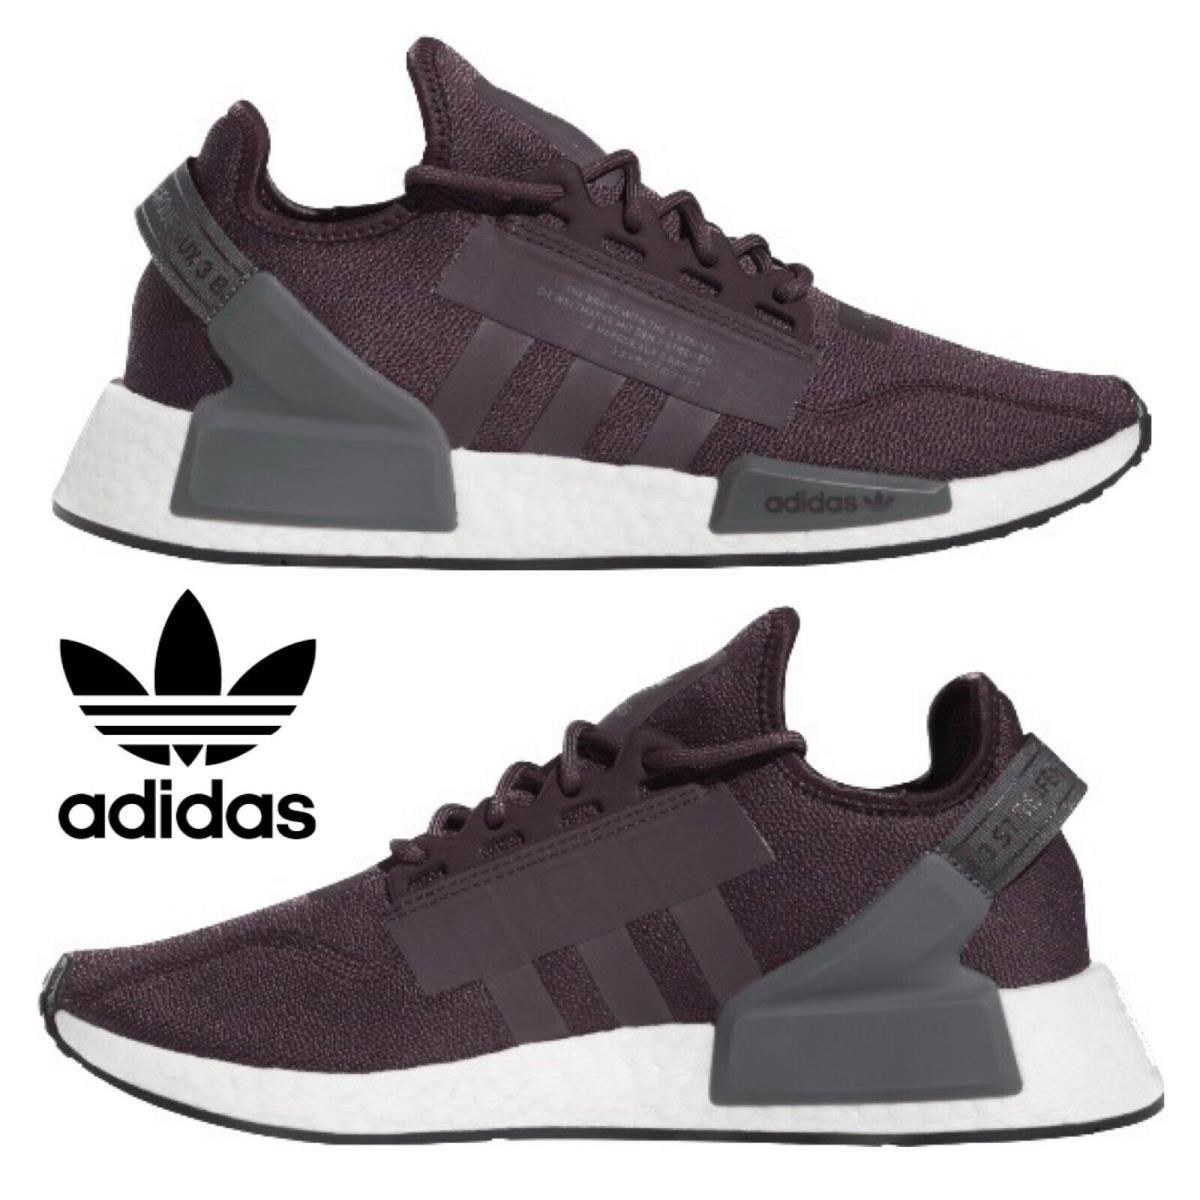 Adidas Originals Nmd V2 Men`s Sneakers Running Shoes Gym Casual Sport Burgundy